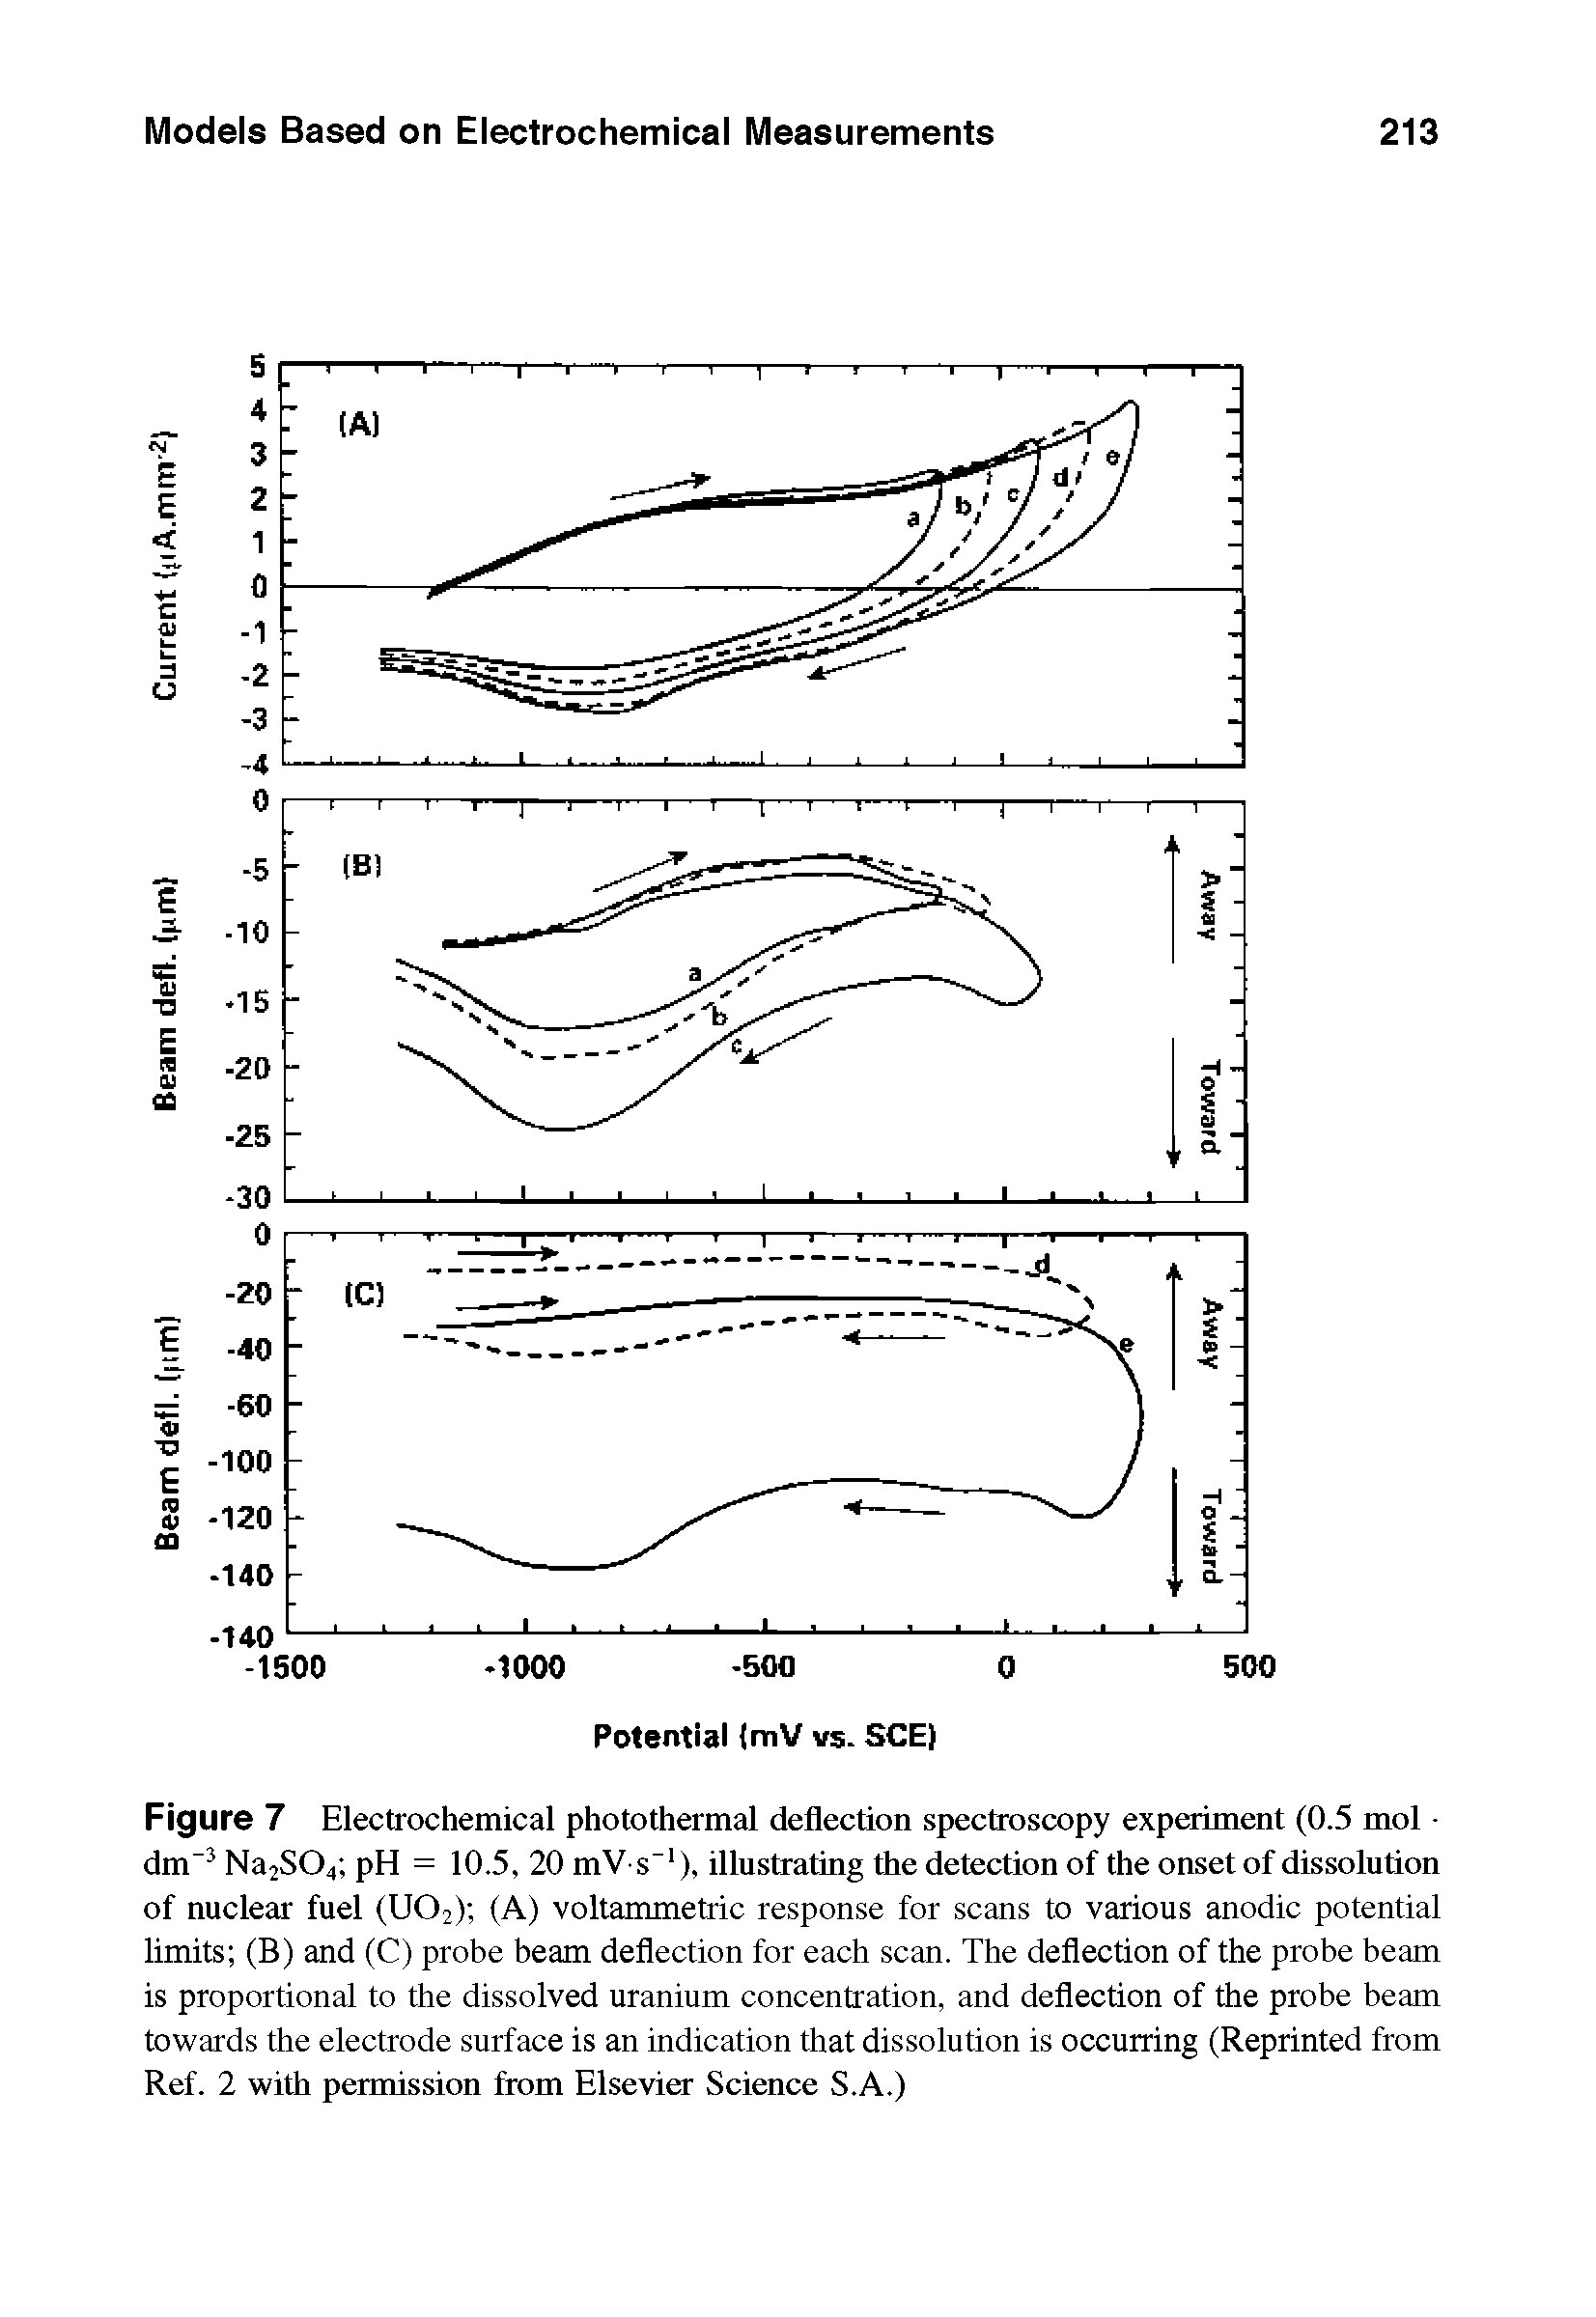 Figure 7 Electrochemical photothermal deflection spectroscopy experiment (0.5 mol dm-3 Na2S04 pH = 10.5, 20 mV s 1), illustrating the detection of the onset of dissolution of nuclear fuel (U02) (A) voltammetric response for scans to various anodic potential limits (B) and (C) probe beam deflection for each scan. The deflection of the probe beam is proportional to the dissolved uranium concentration, and deflection of the probe beam towards the electrode surface is an indication that dissolution is occurring (Reprinted from Ref. 2 with permission from Elsevier Science S.A.)...